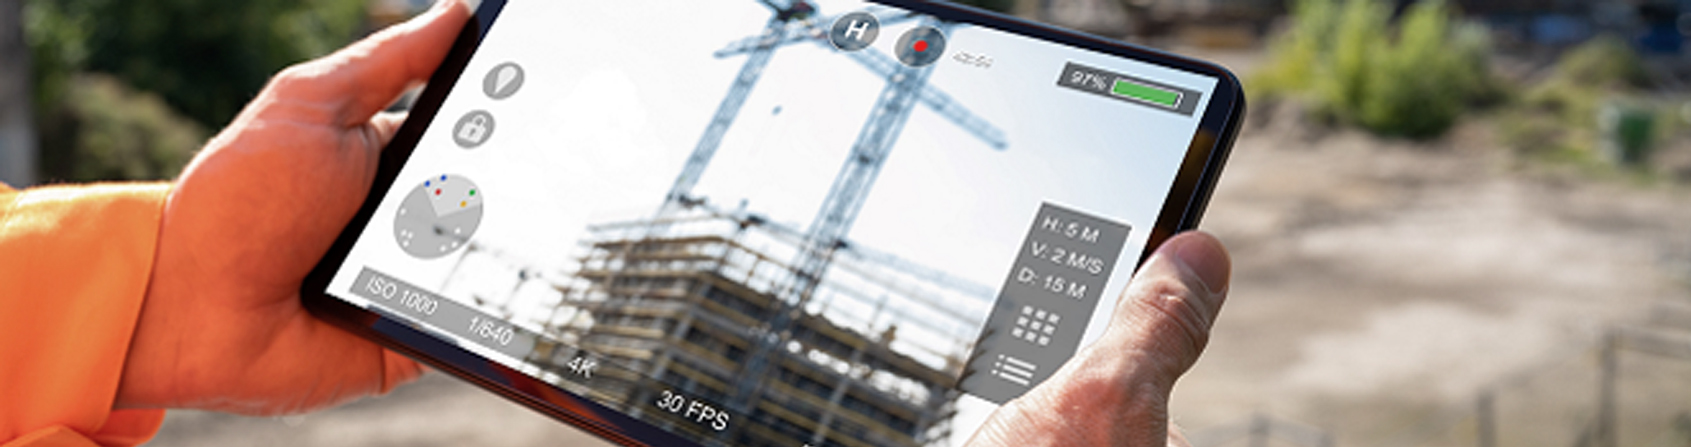 PERSON HOLDING A TABLET WITH A PICTURE OF CRANES CONSTRUCTING A BUILDING